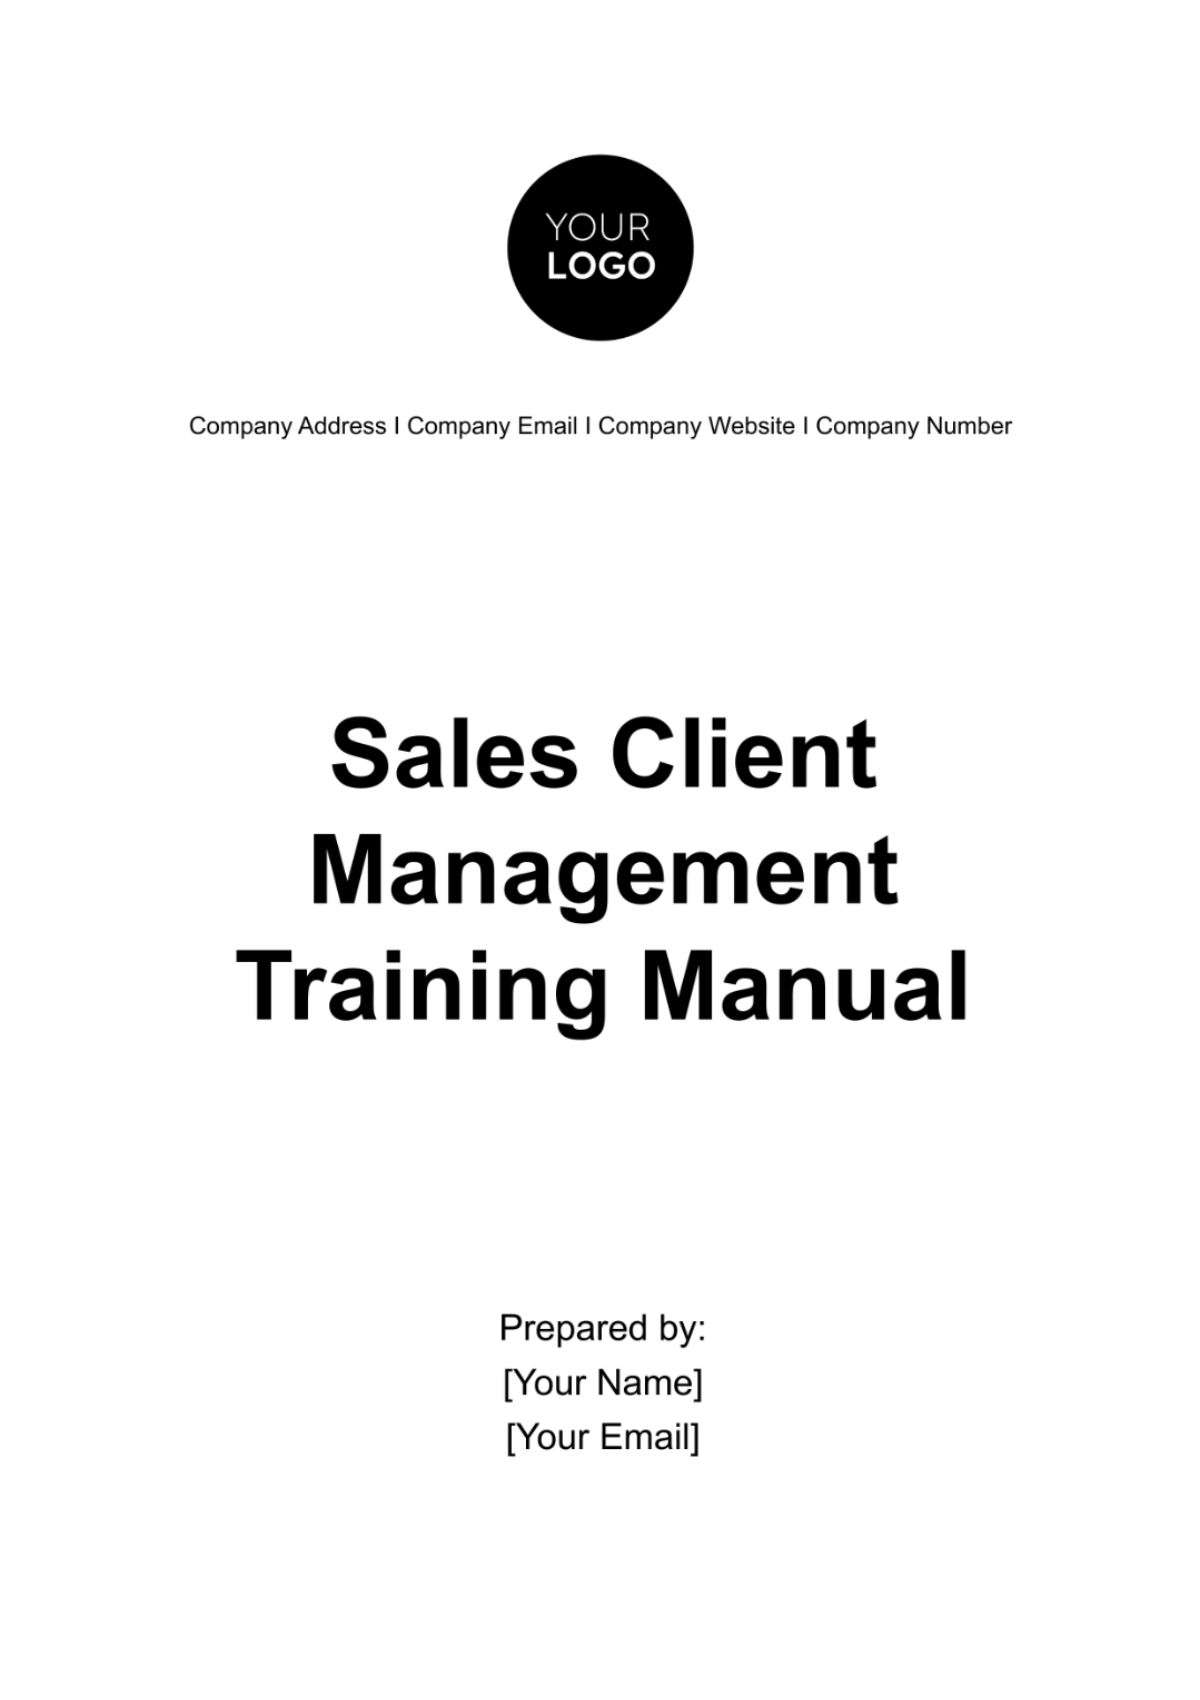 Free Sales Client Management Training Manual Template